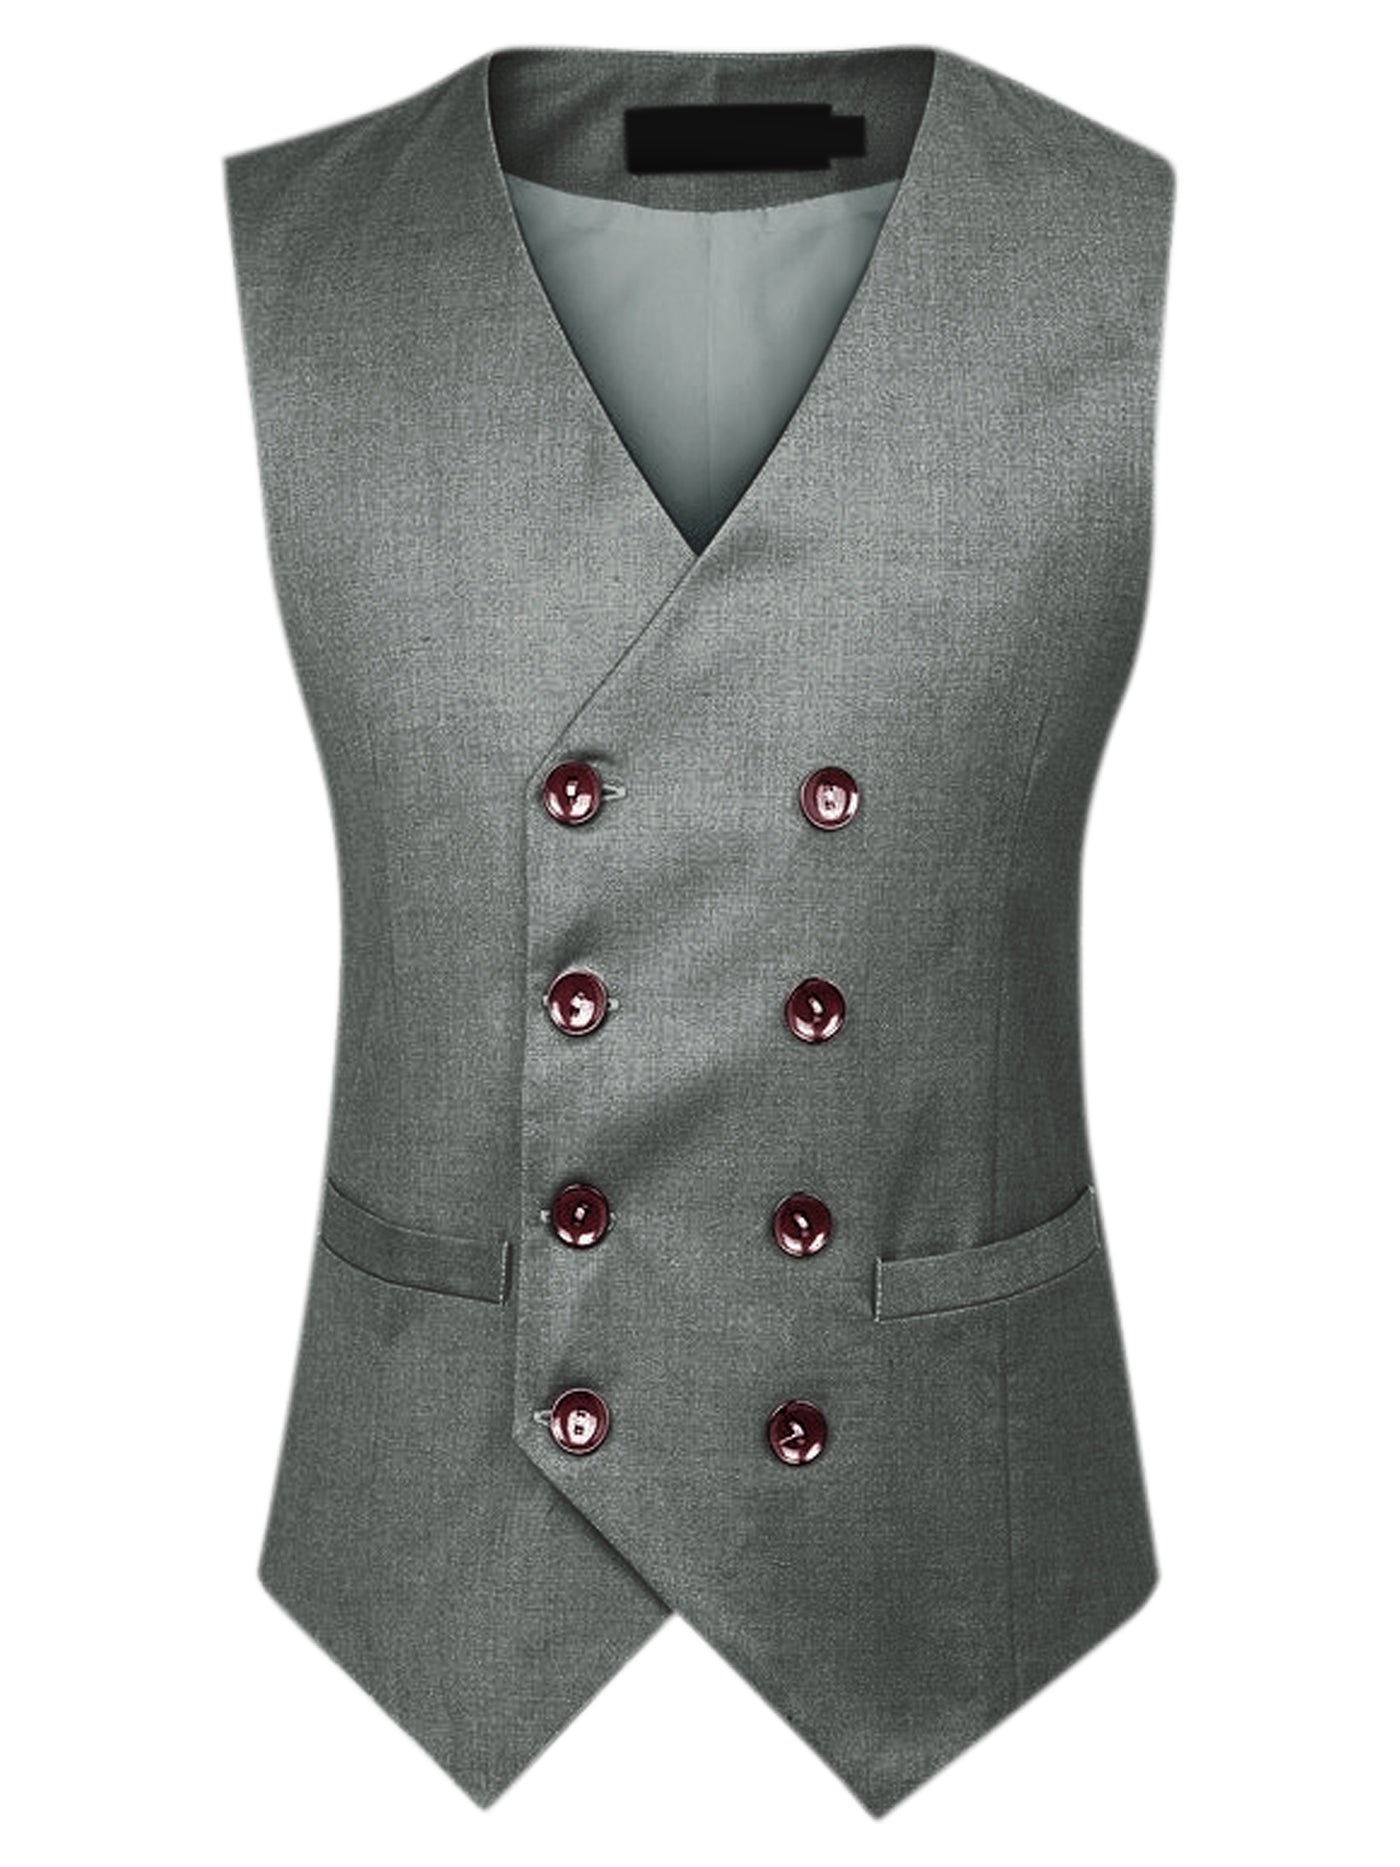 Bublédon Men's Suits Vest V-Neck Sleeveless Double Breasted Business Waistcoat